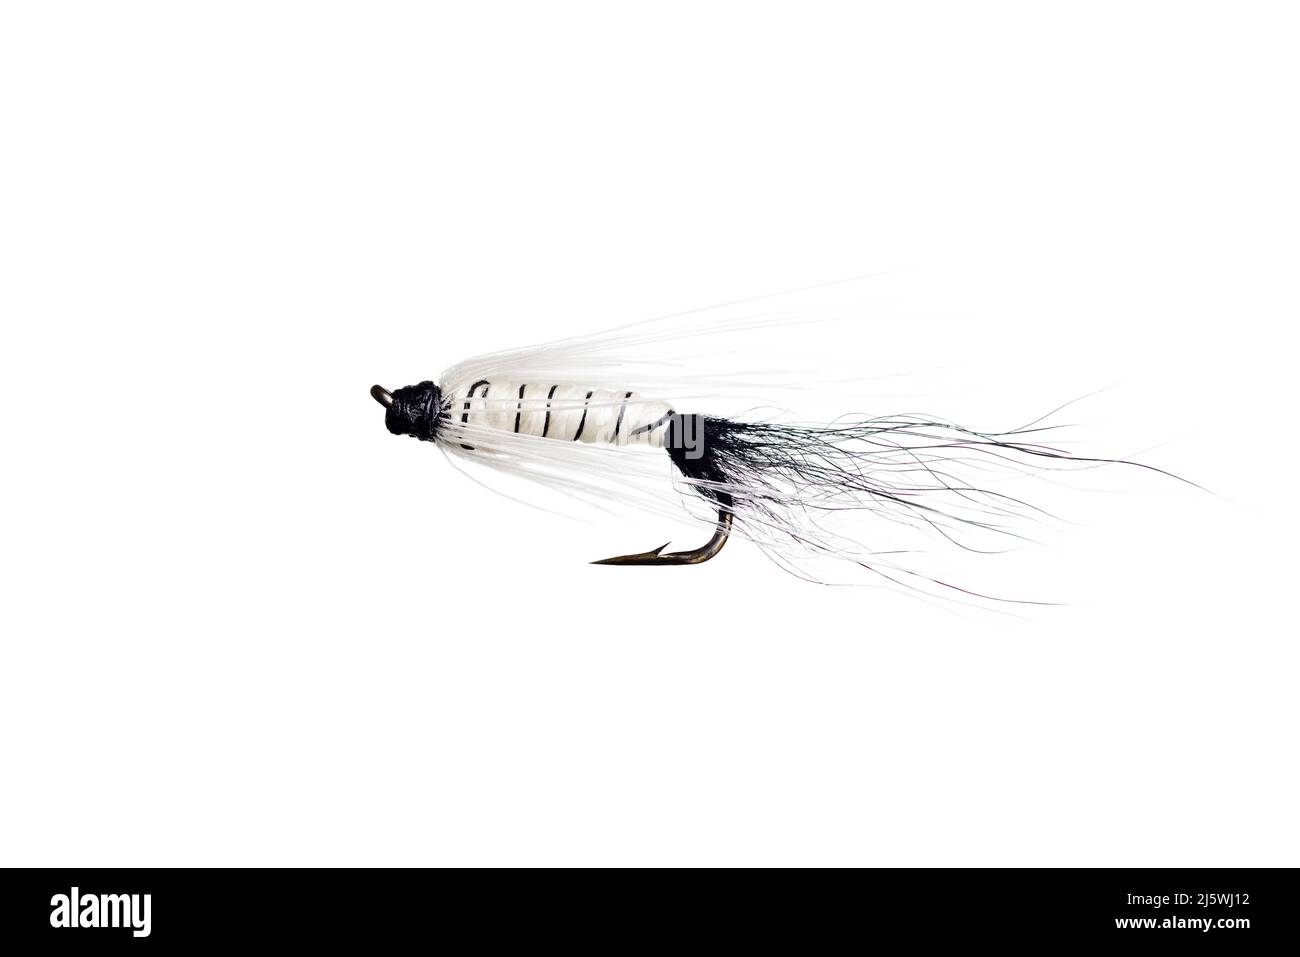 Fishing Fly Isolated Against a White Background Stock Photo